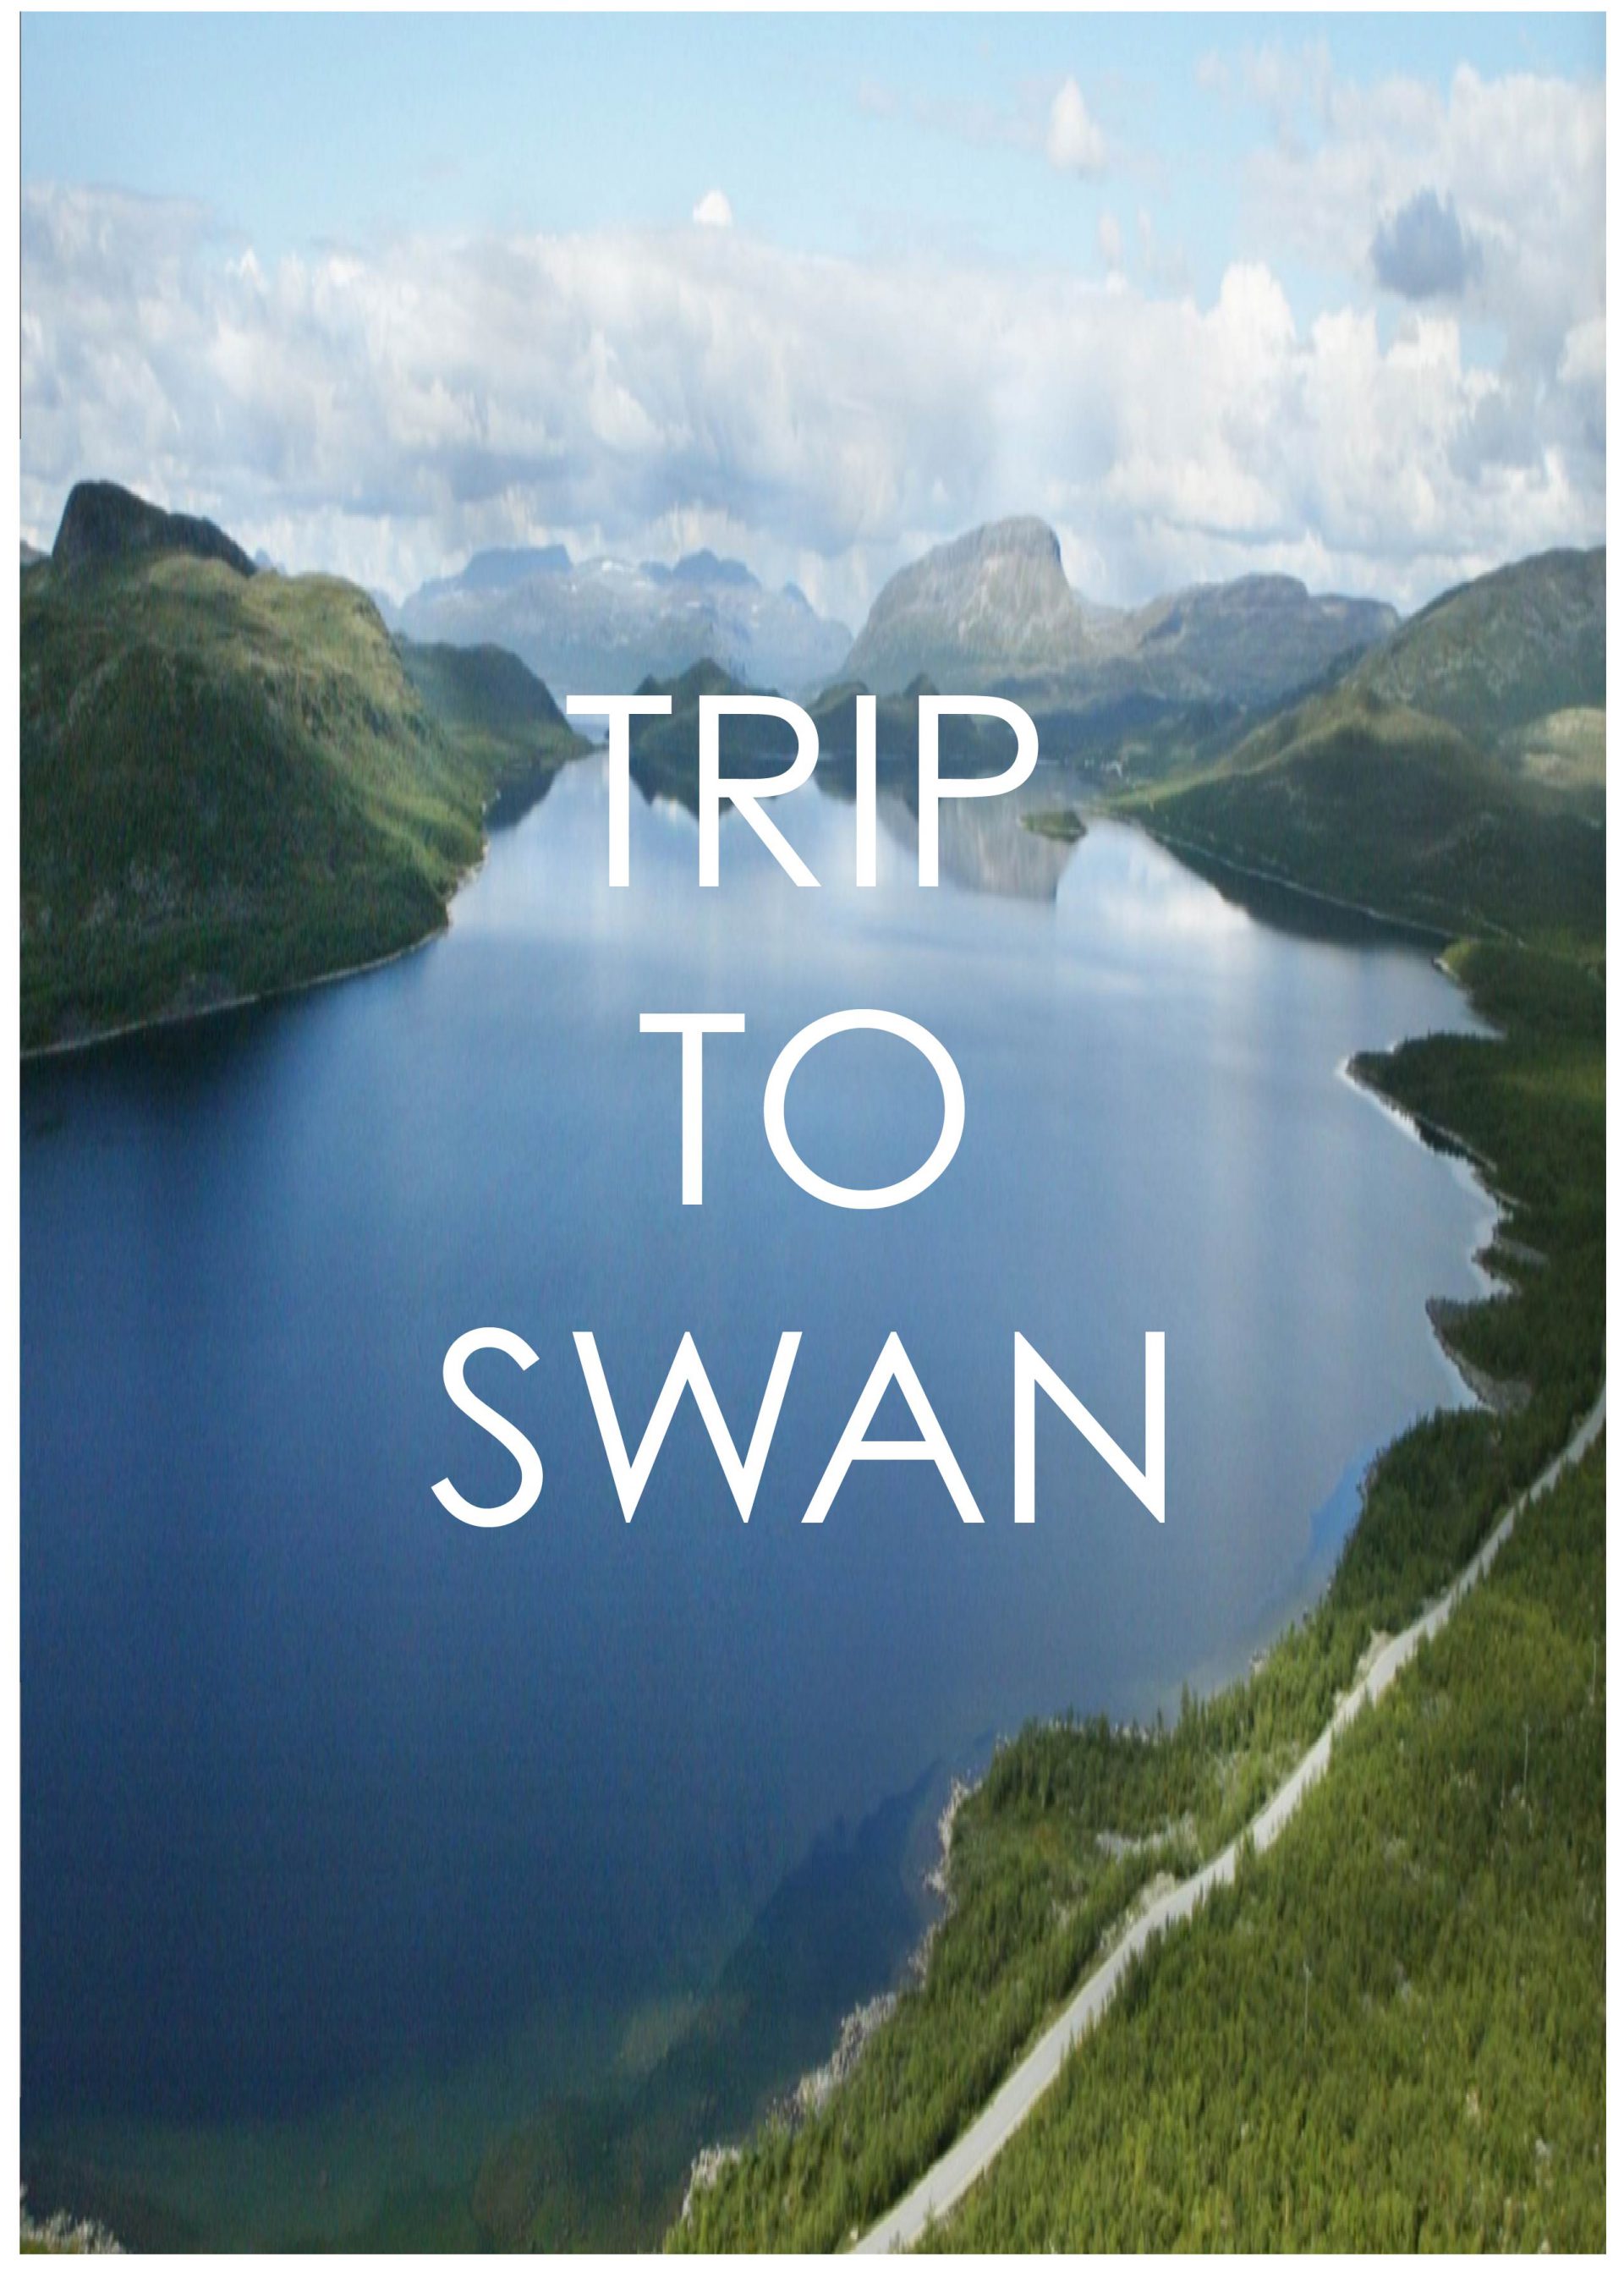 TRIP TO SWAN